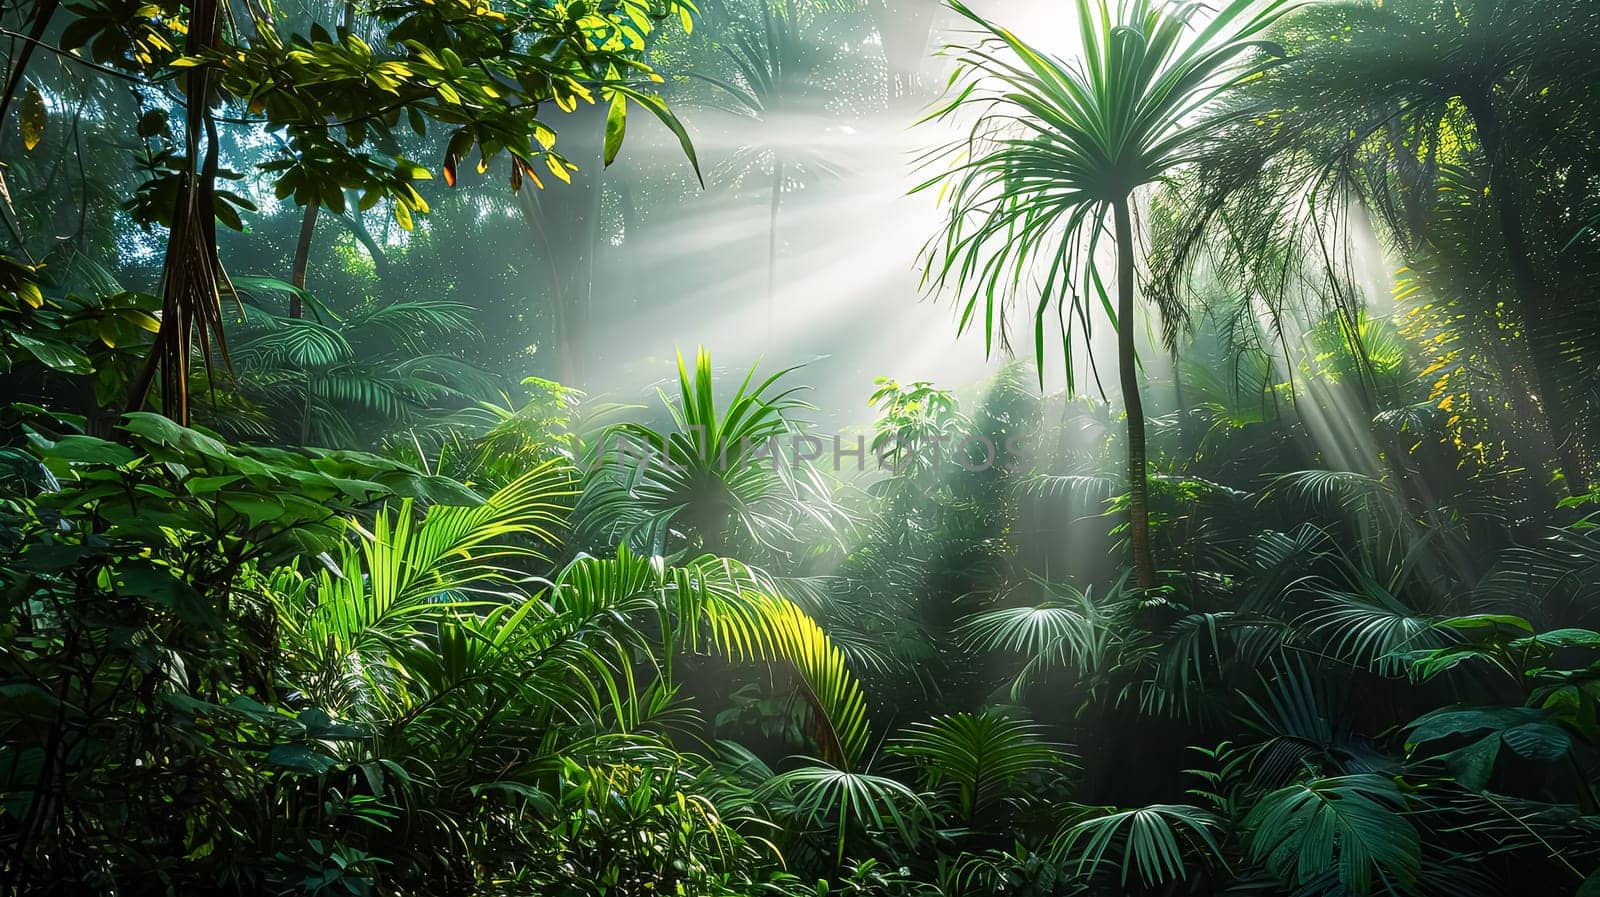 A lush, tropical jungle with a bright sun shining through the trees. The sunlight creates a warm, inviting atmosphere and highlights the vibrant green foliage. The scene is full of life and energy